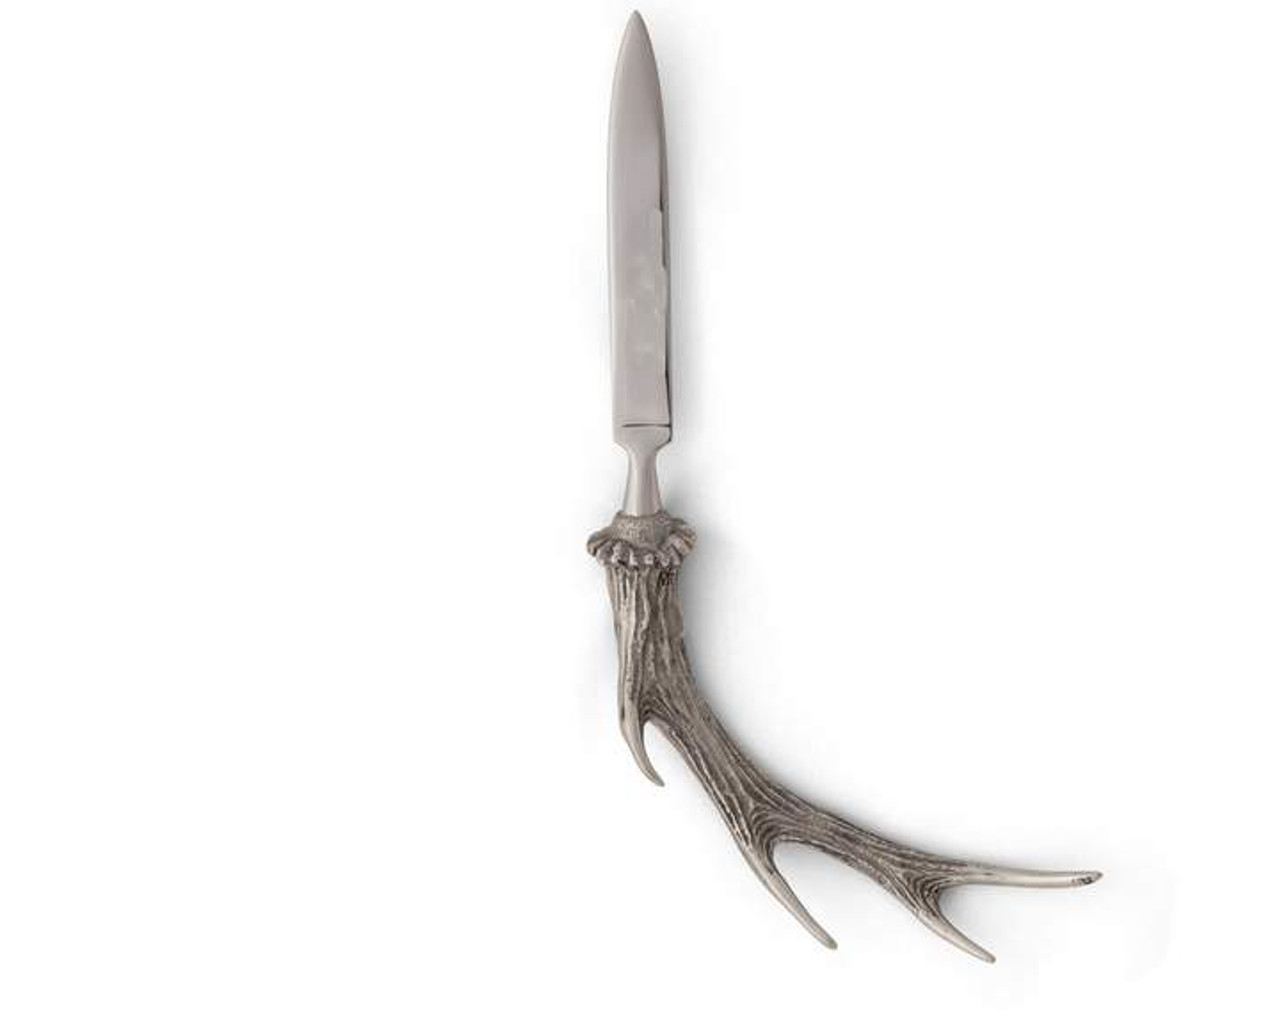 Letter opener, large flower, in pewter and stainless steel